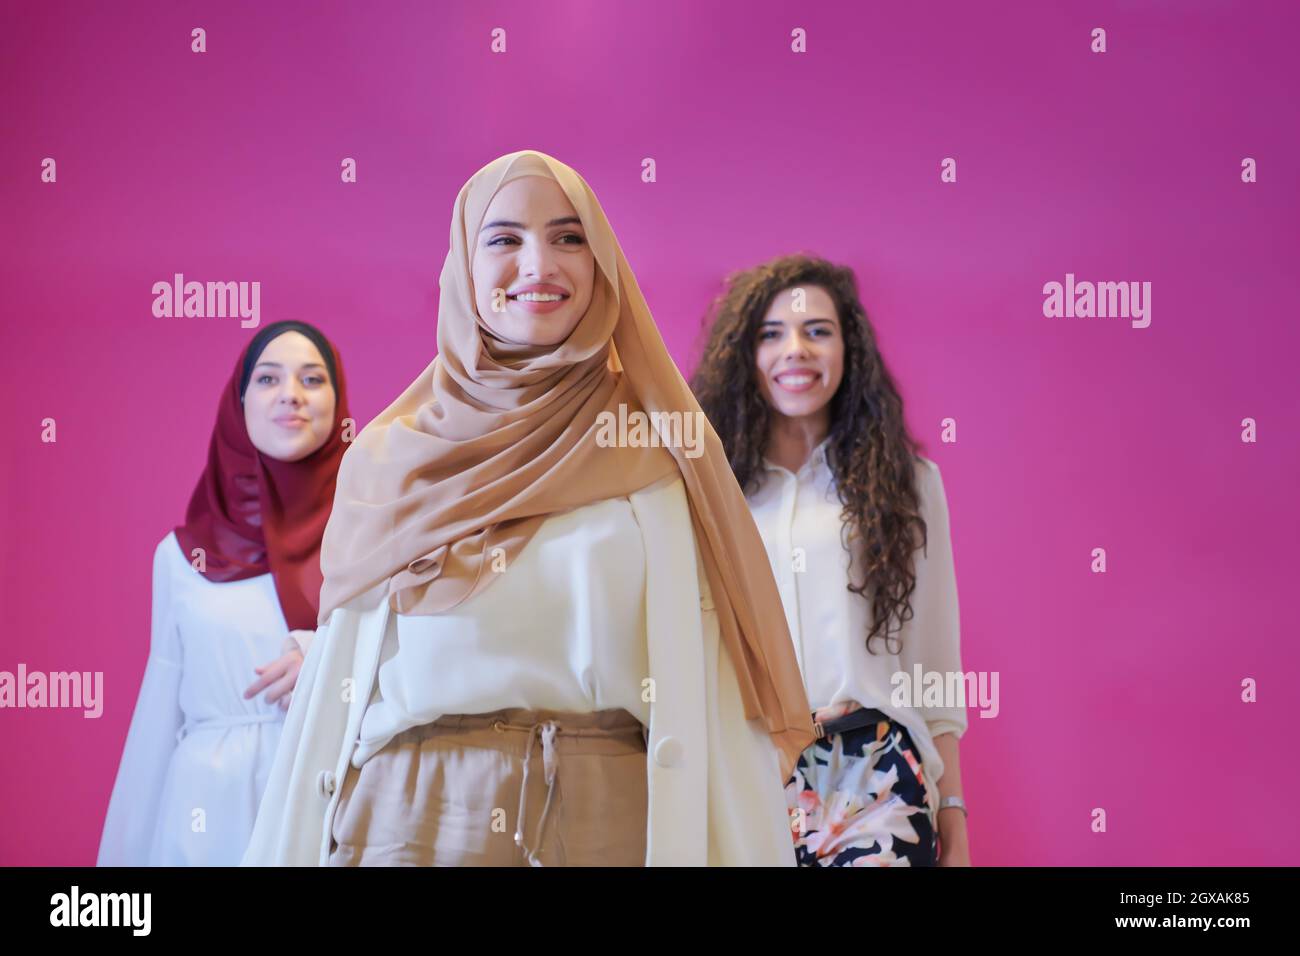 group portrait of beautiful muslim women two of them in fashionable dress with hijab isolated on pink background representing modern islam fashion and Stock Photo